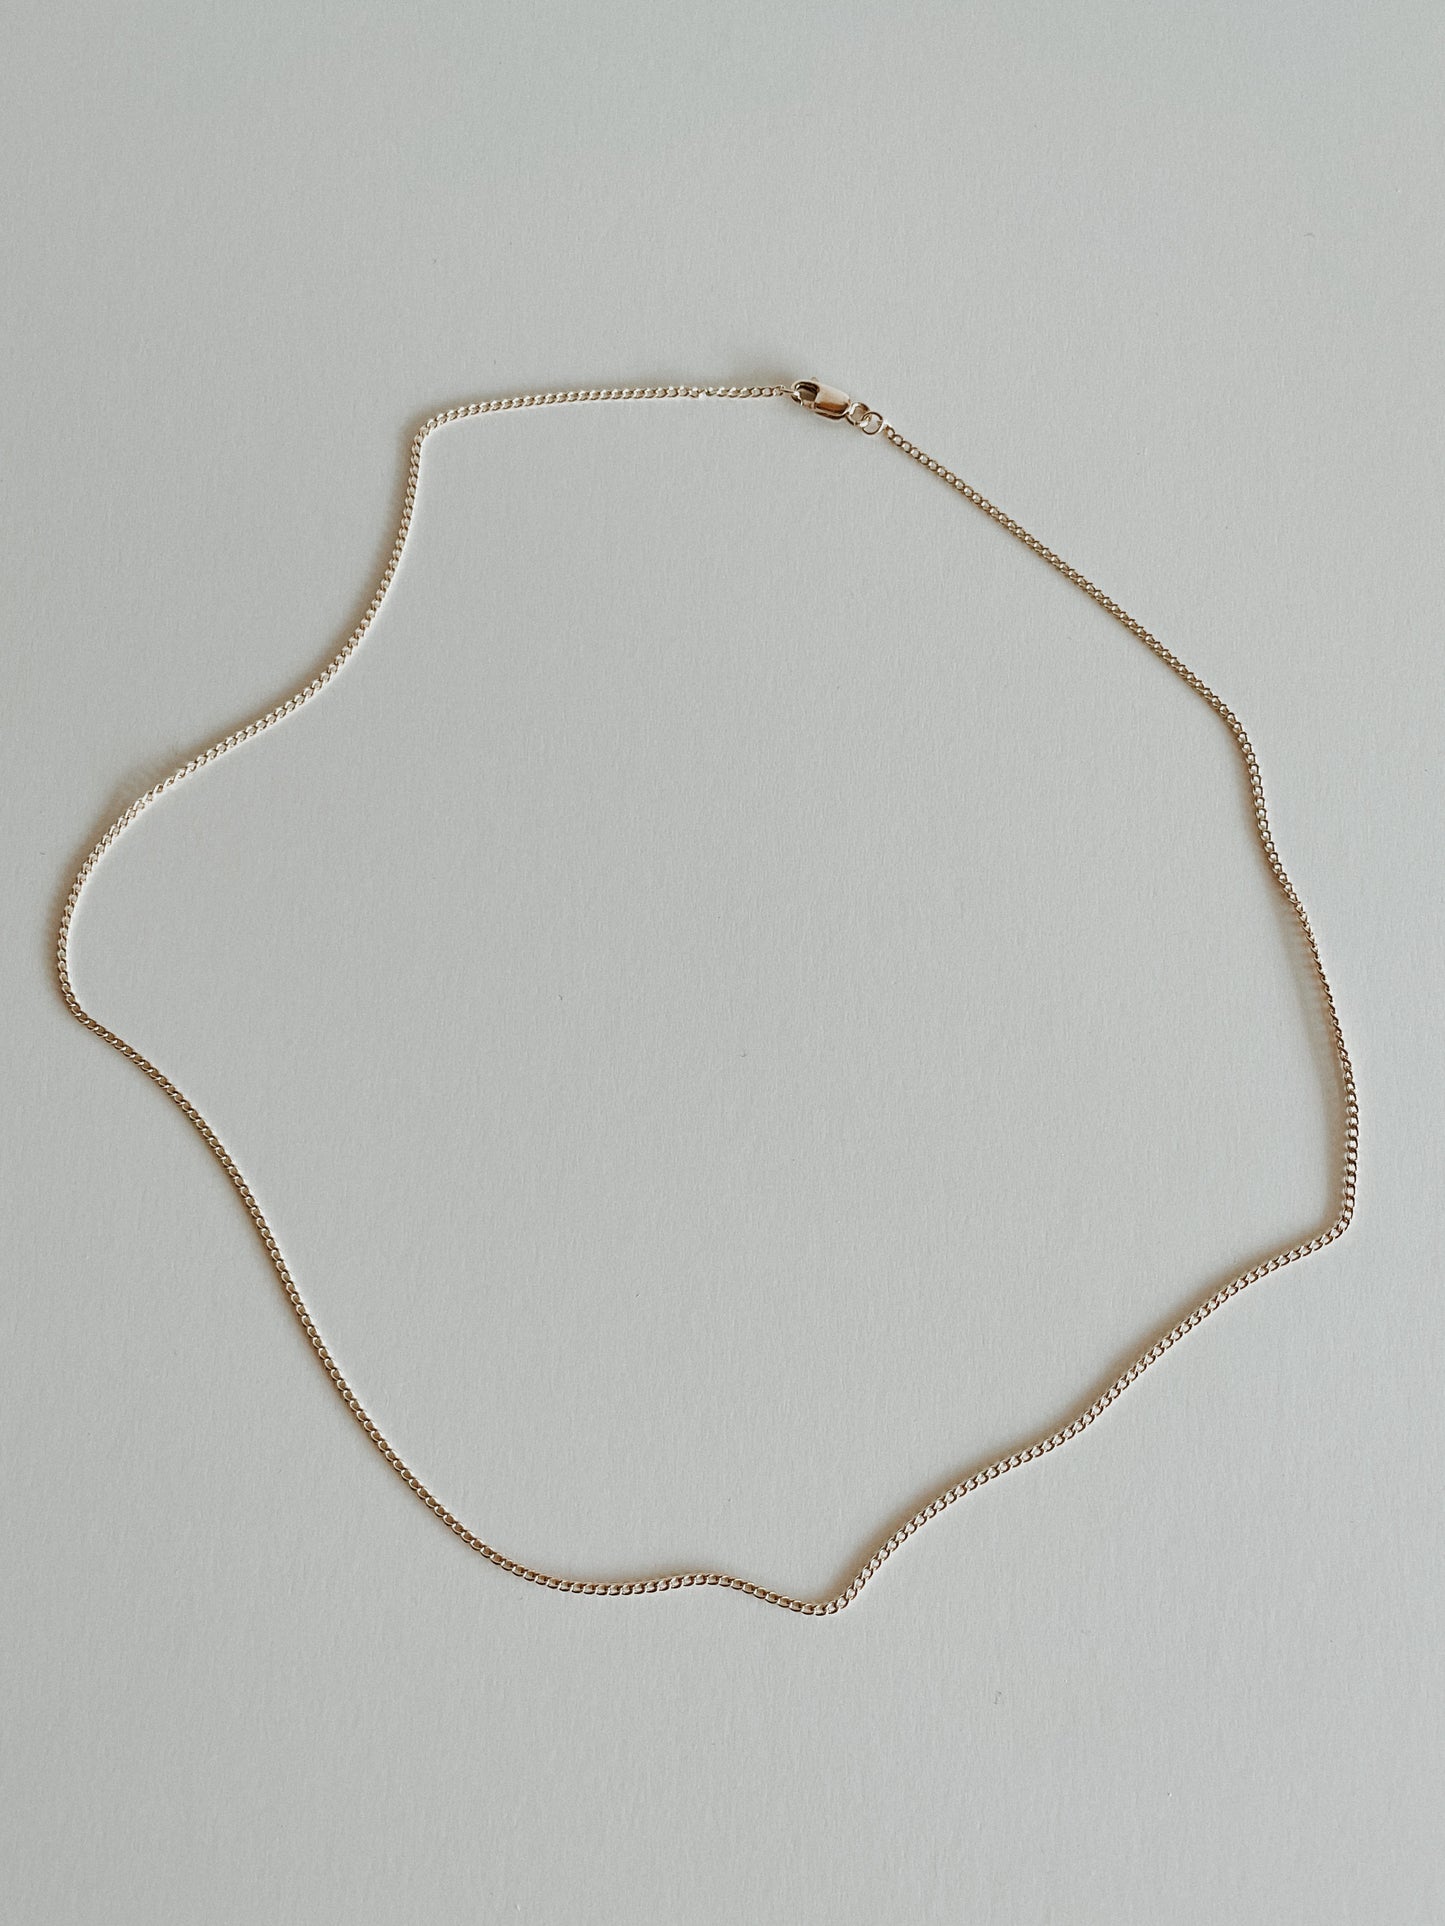 Goldie Necklace / Curb Chain